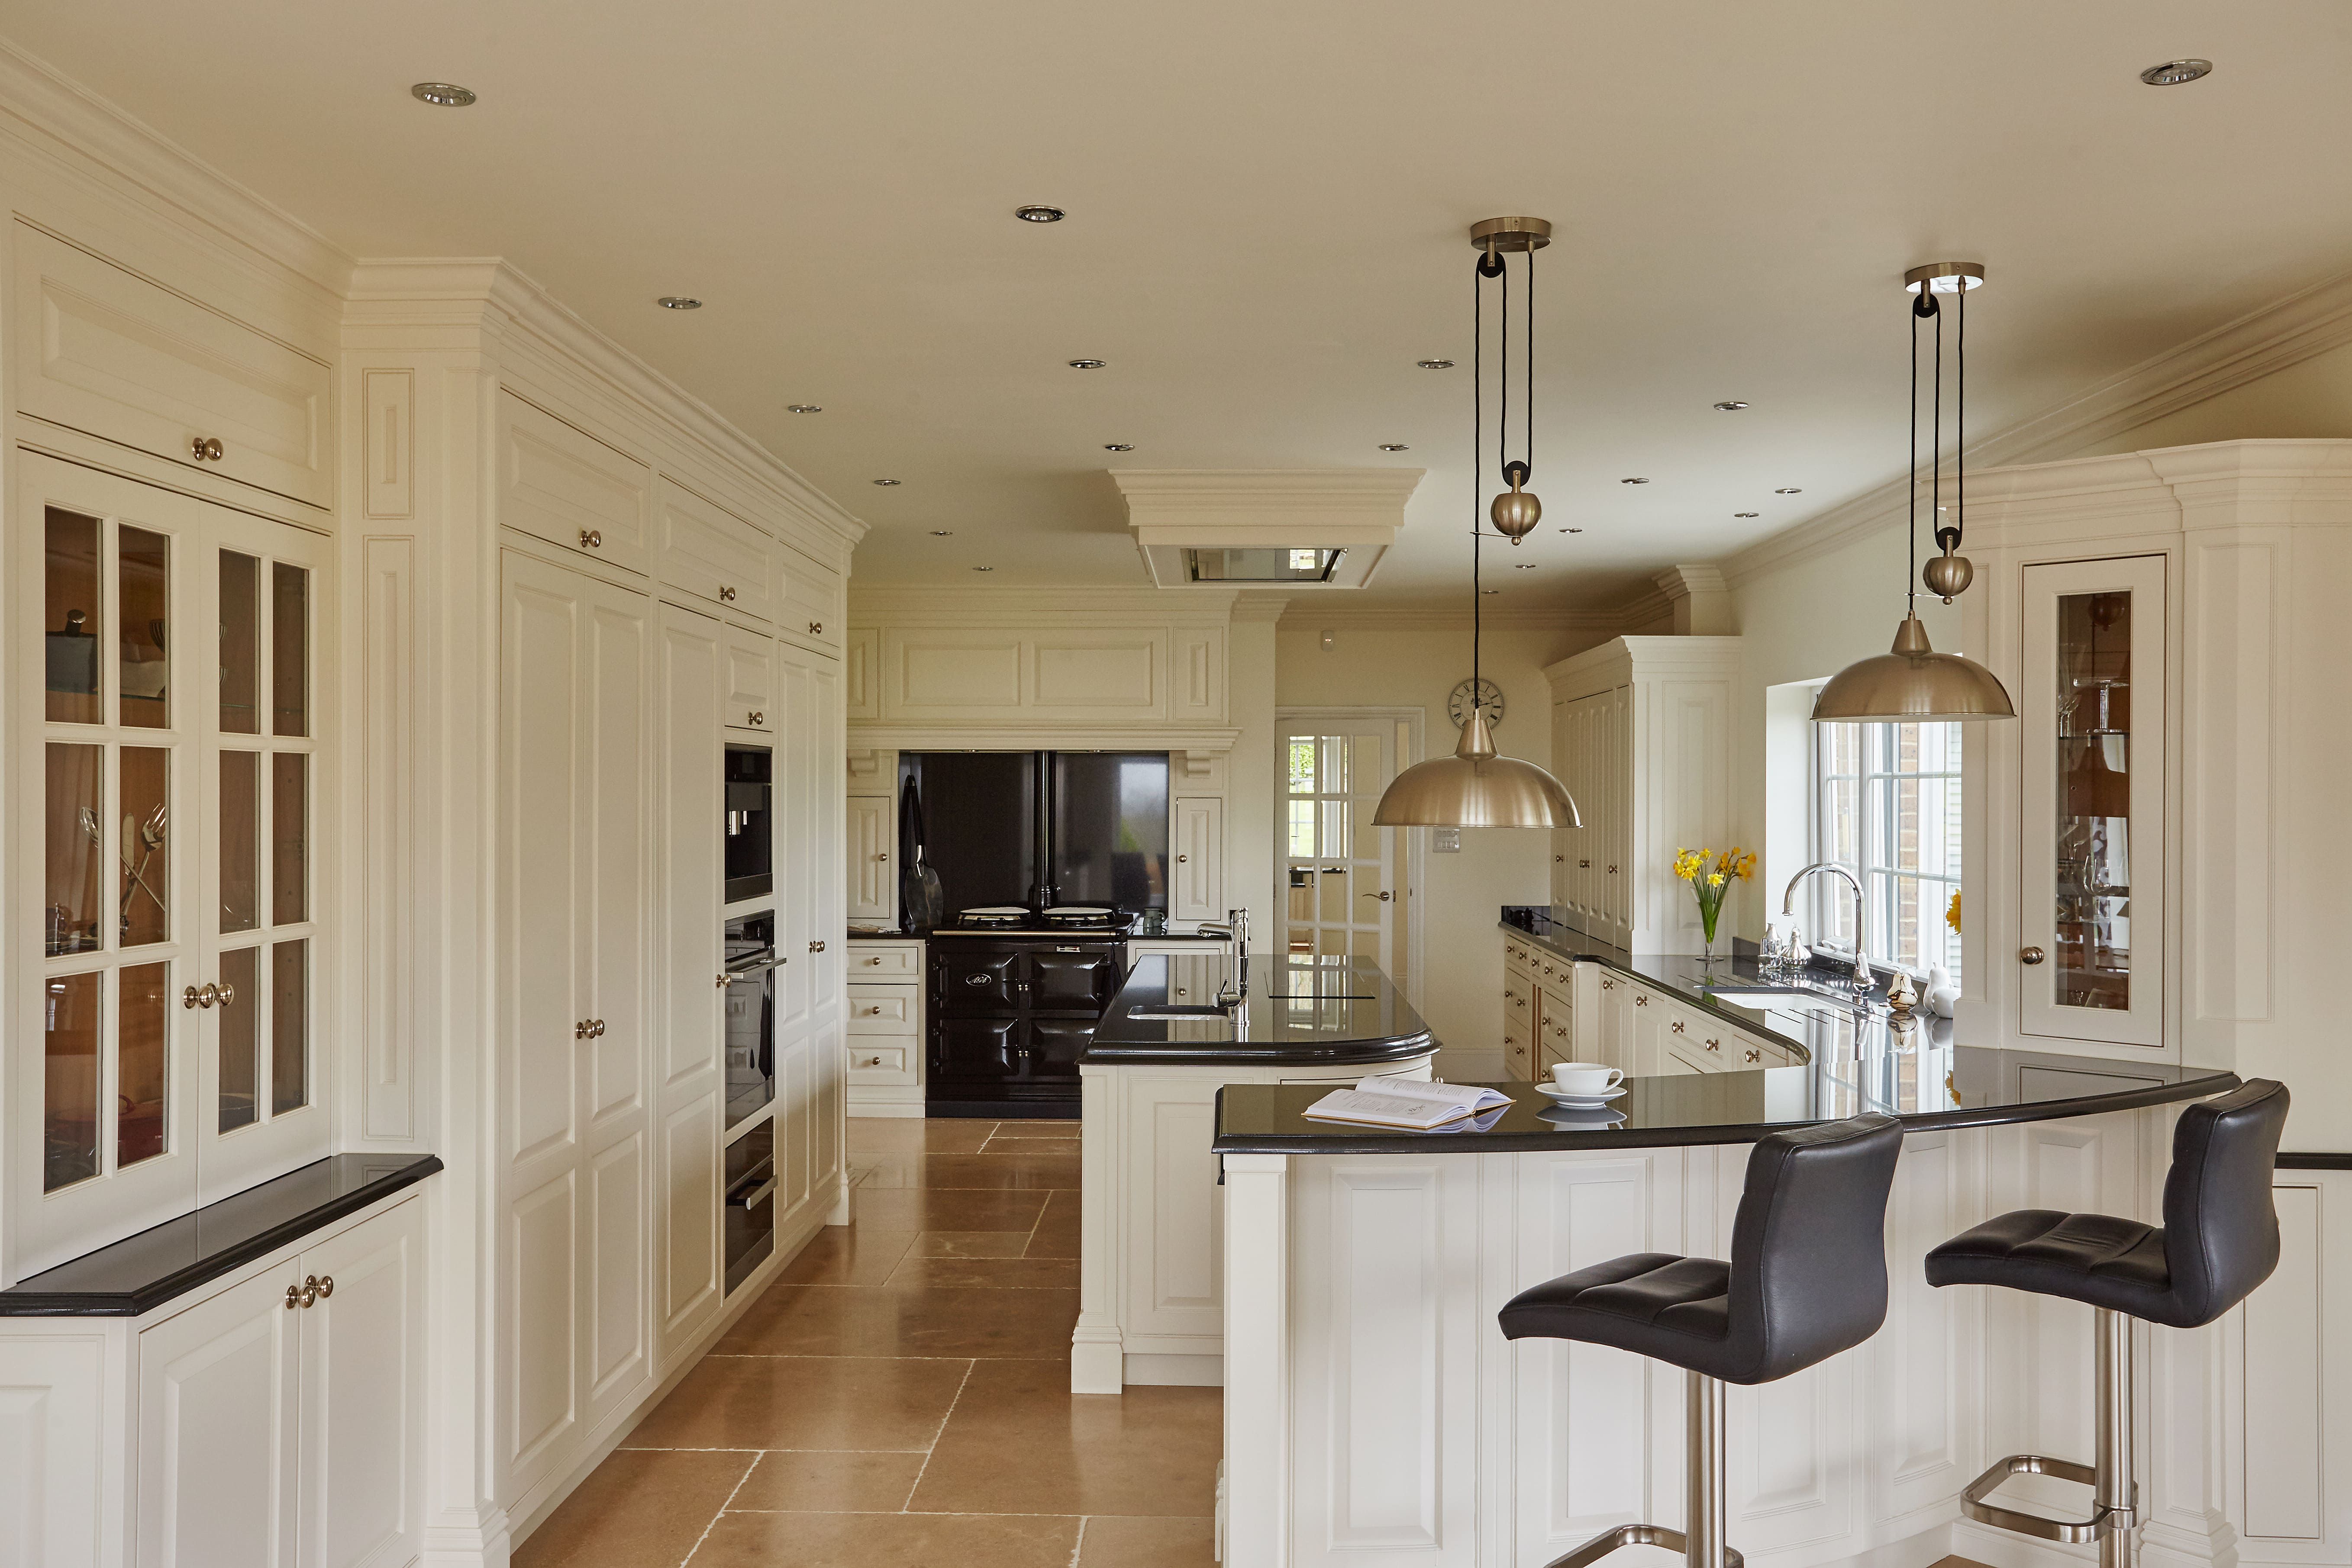 An expansive, classic kitchen with cream cabinetry and black countertops. The kitchen features glass-fronted cabinets, a large black stove, and built-in modern appliances. There's a central island with a built-in sink and a breakfast bar with two black leather bar stools.